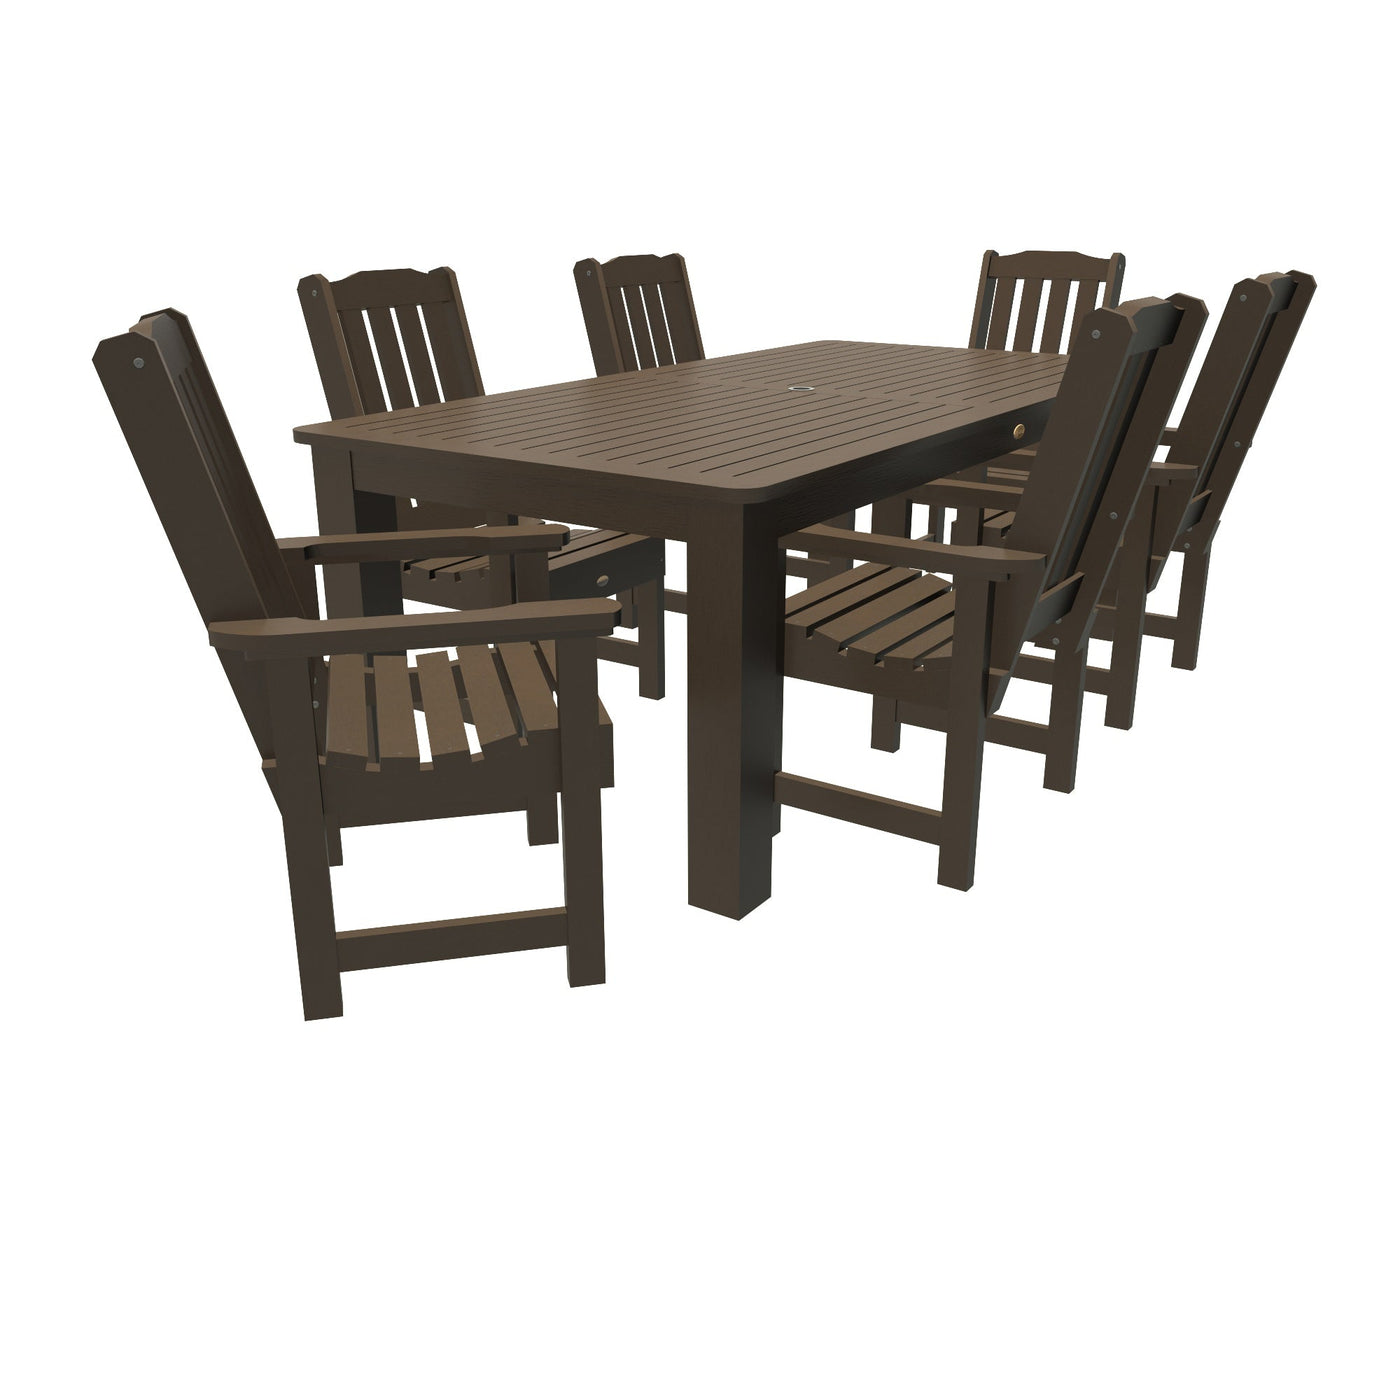 Lehigh 7pc Rectangular Outdoor Dining Set 42in x 84in - Dining Height Dining Highwood USA Weathered Acorn 